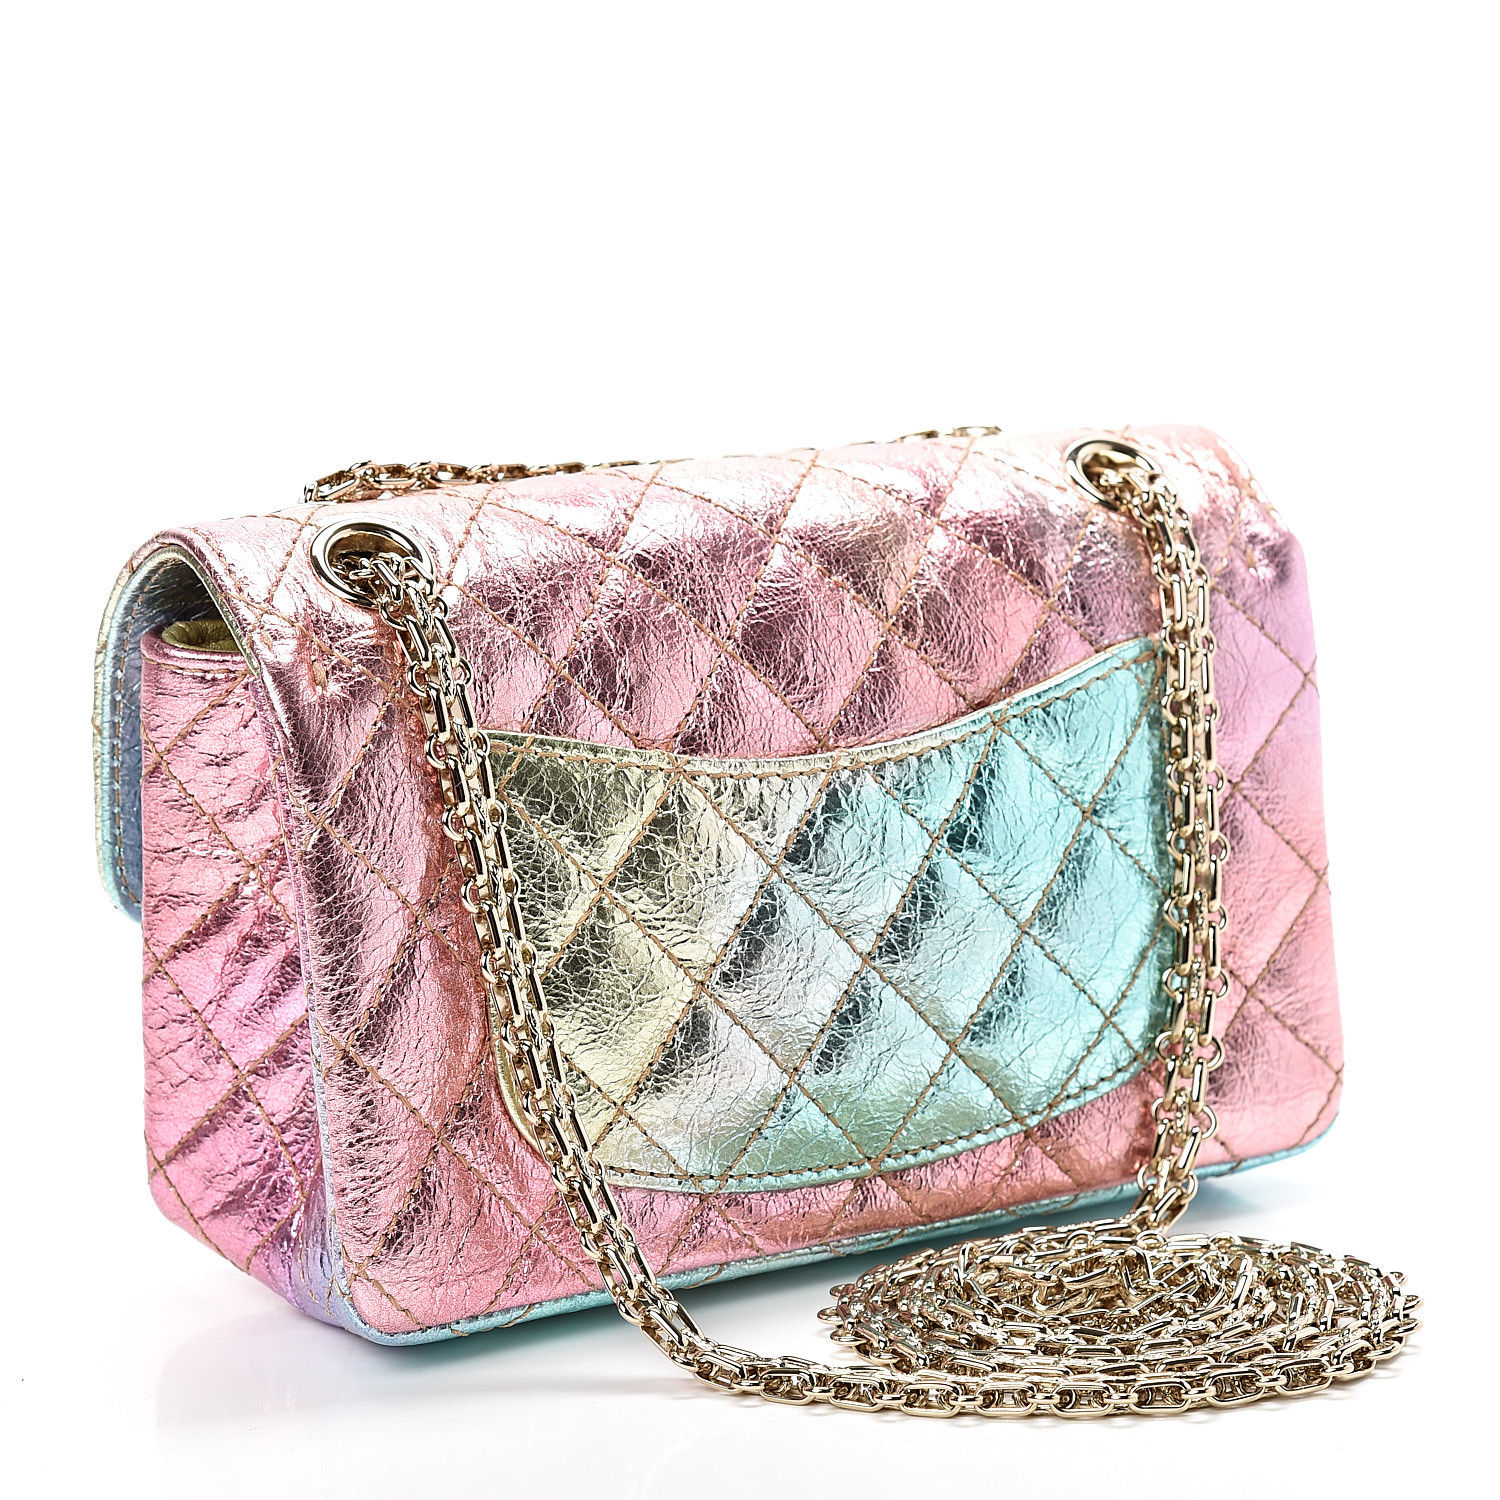 CHANEL Metallic Goatskin Quilted Mini 2.55 Reissue Flap Multicolor 536060